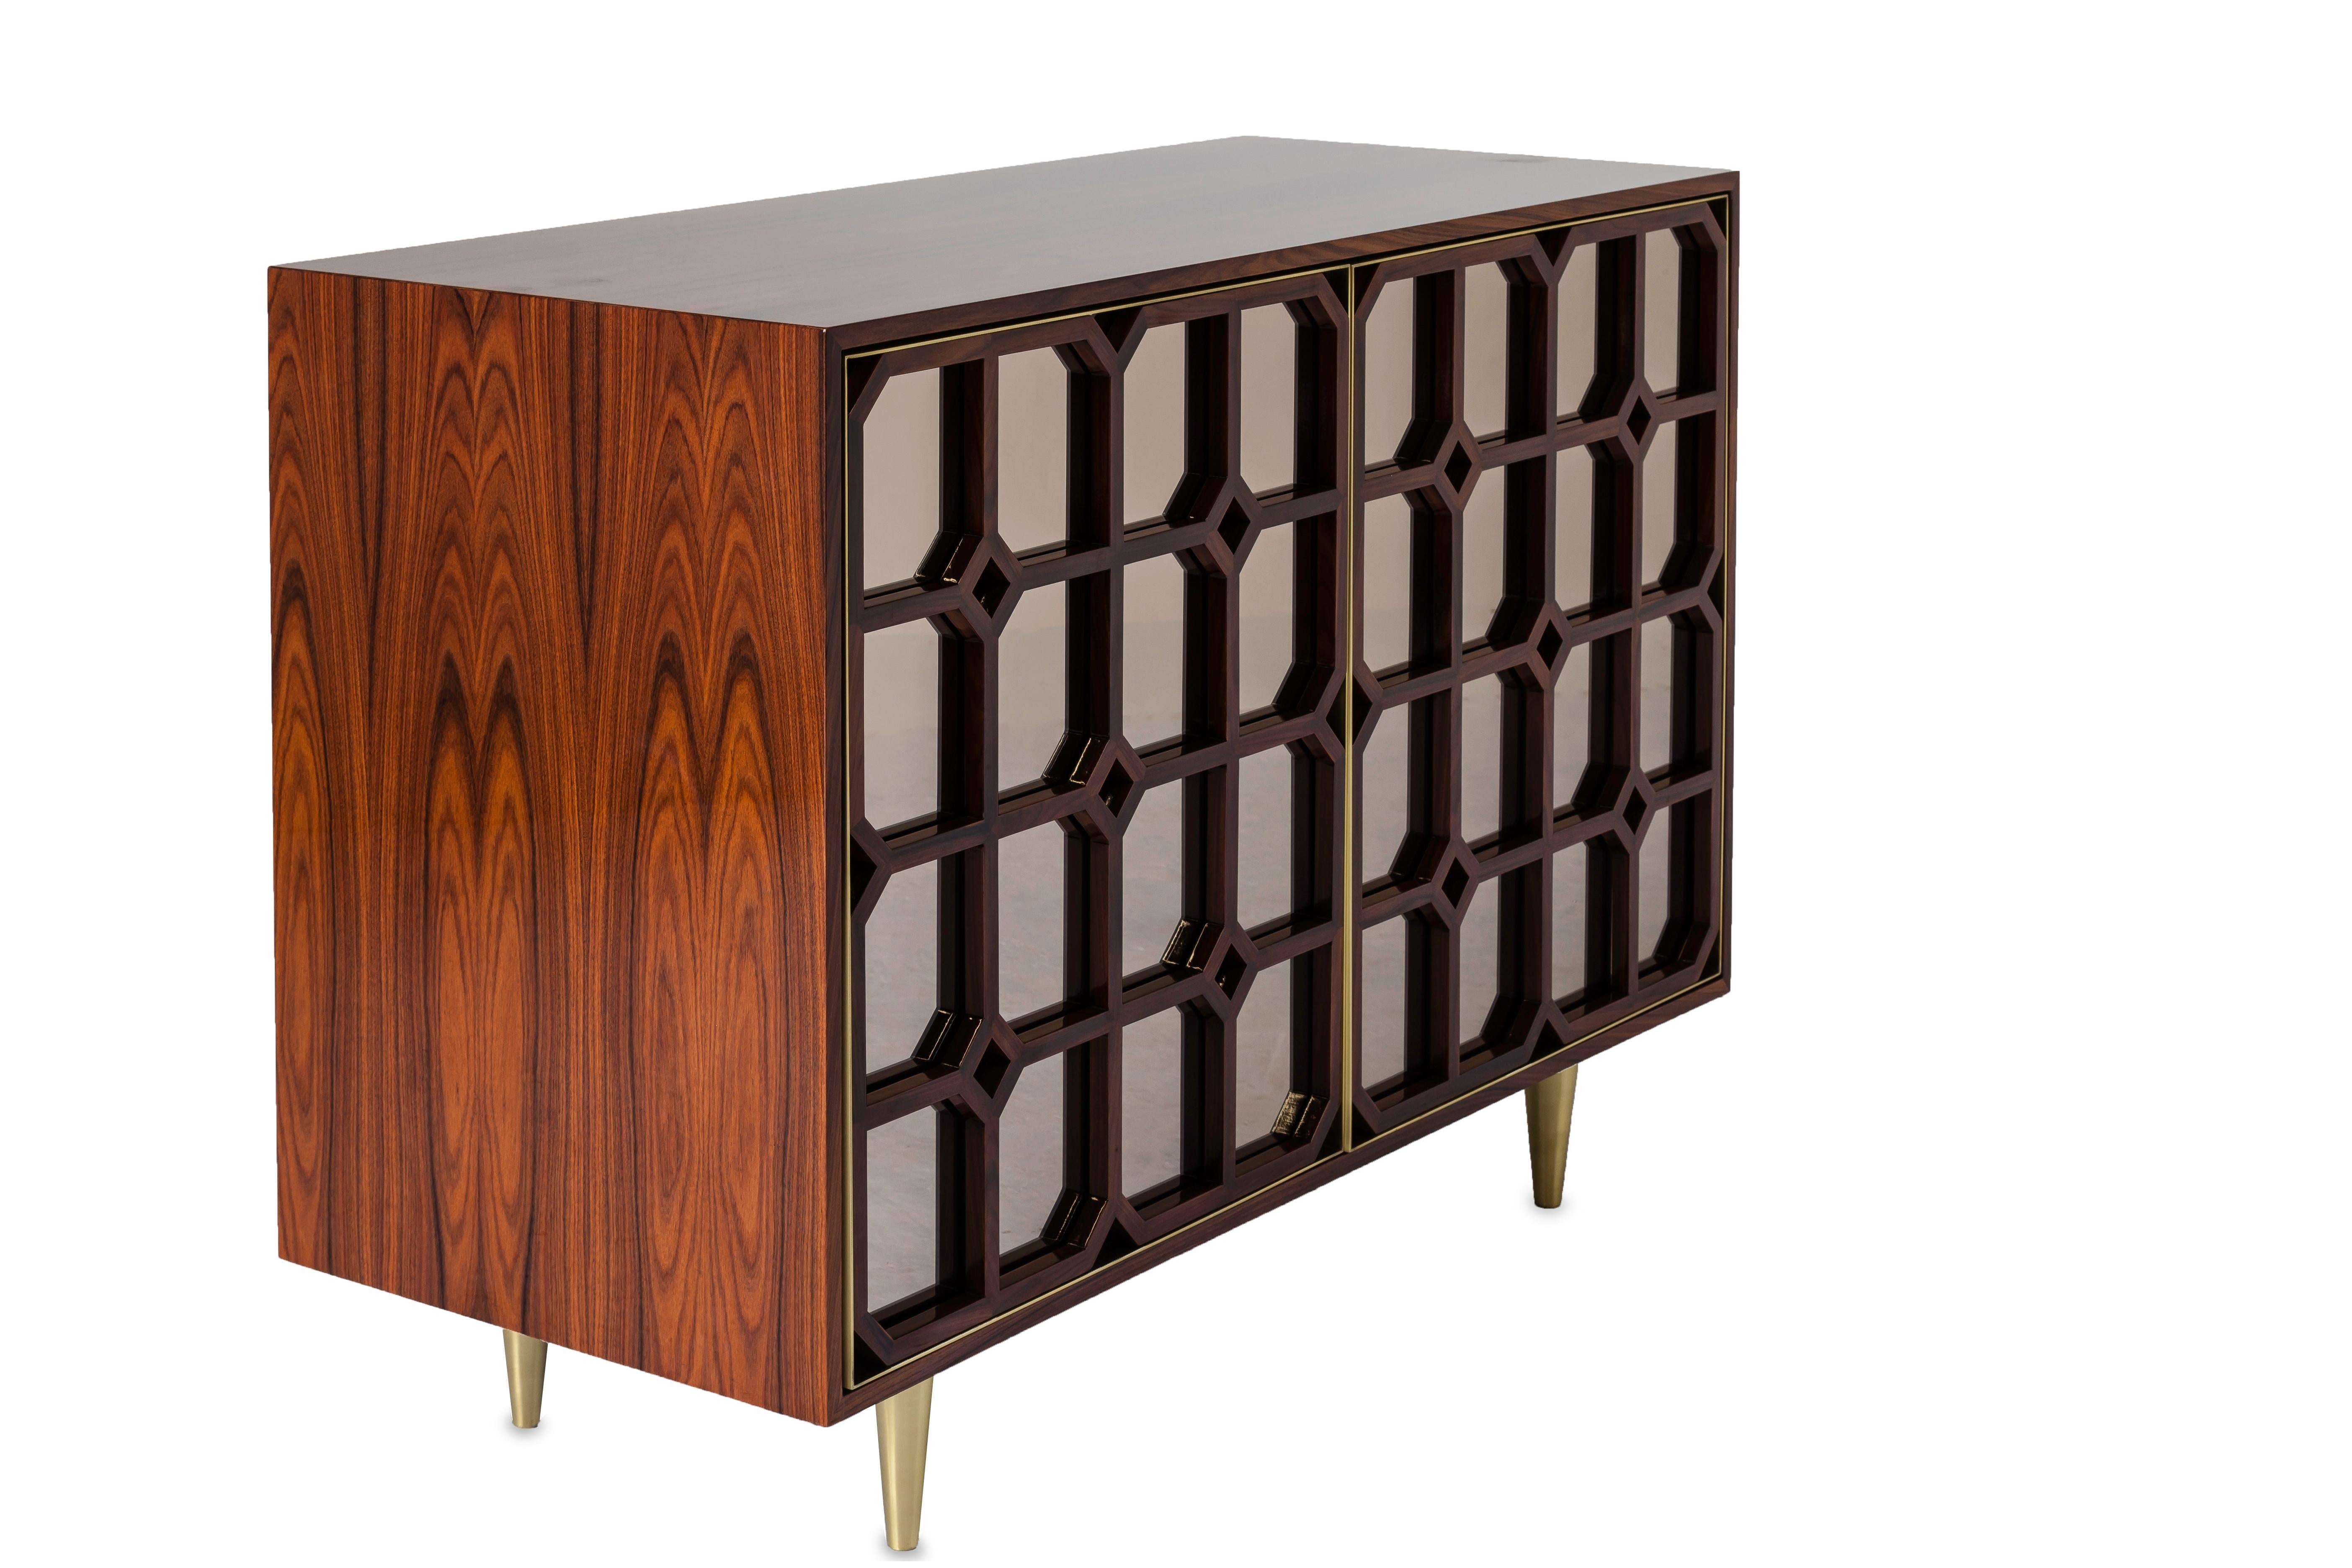 This credenza is inspired in Oriental antique screens and harmoniously combines natural wood, metal and bronze mirrors to create an impressive and sophisticated design, with its far inspirations and contemporary lines. The piece shows a strong